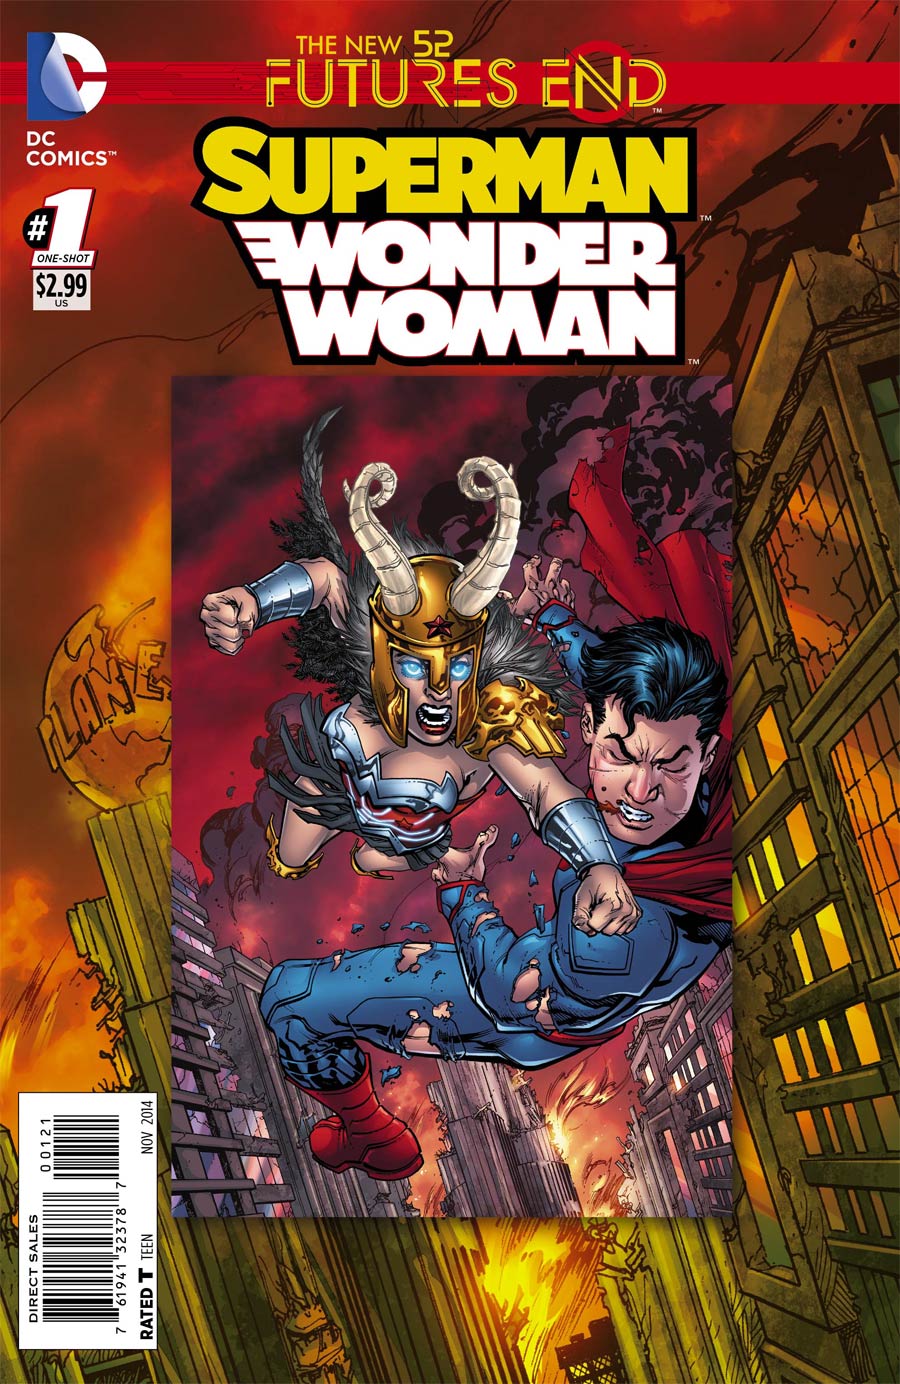 Superman Wonder Woman Futures End #1 Cover B Standard Cover